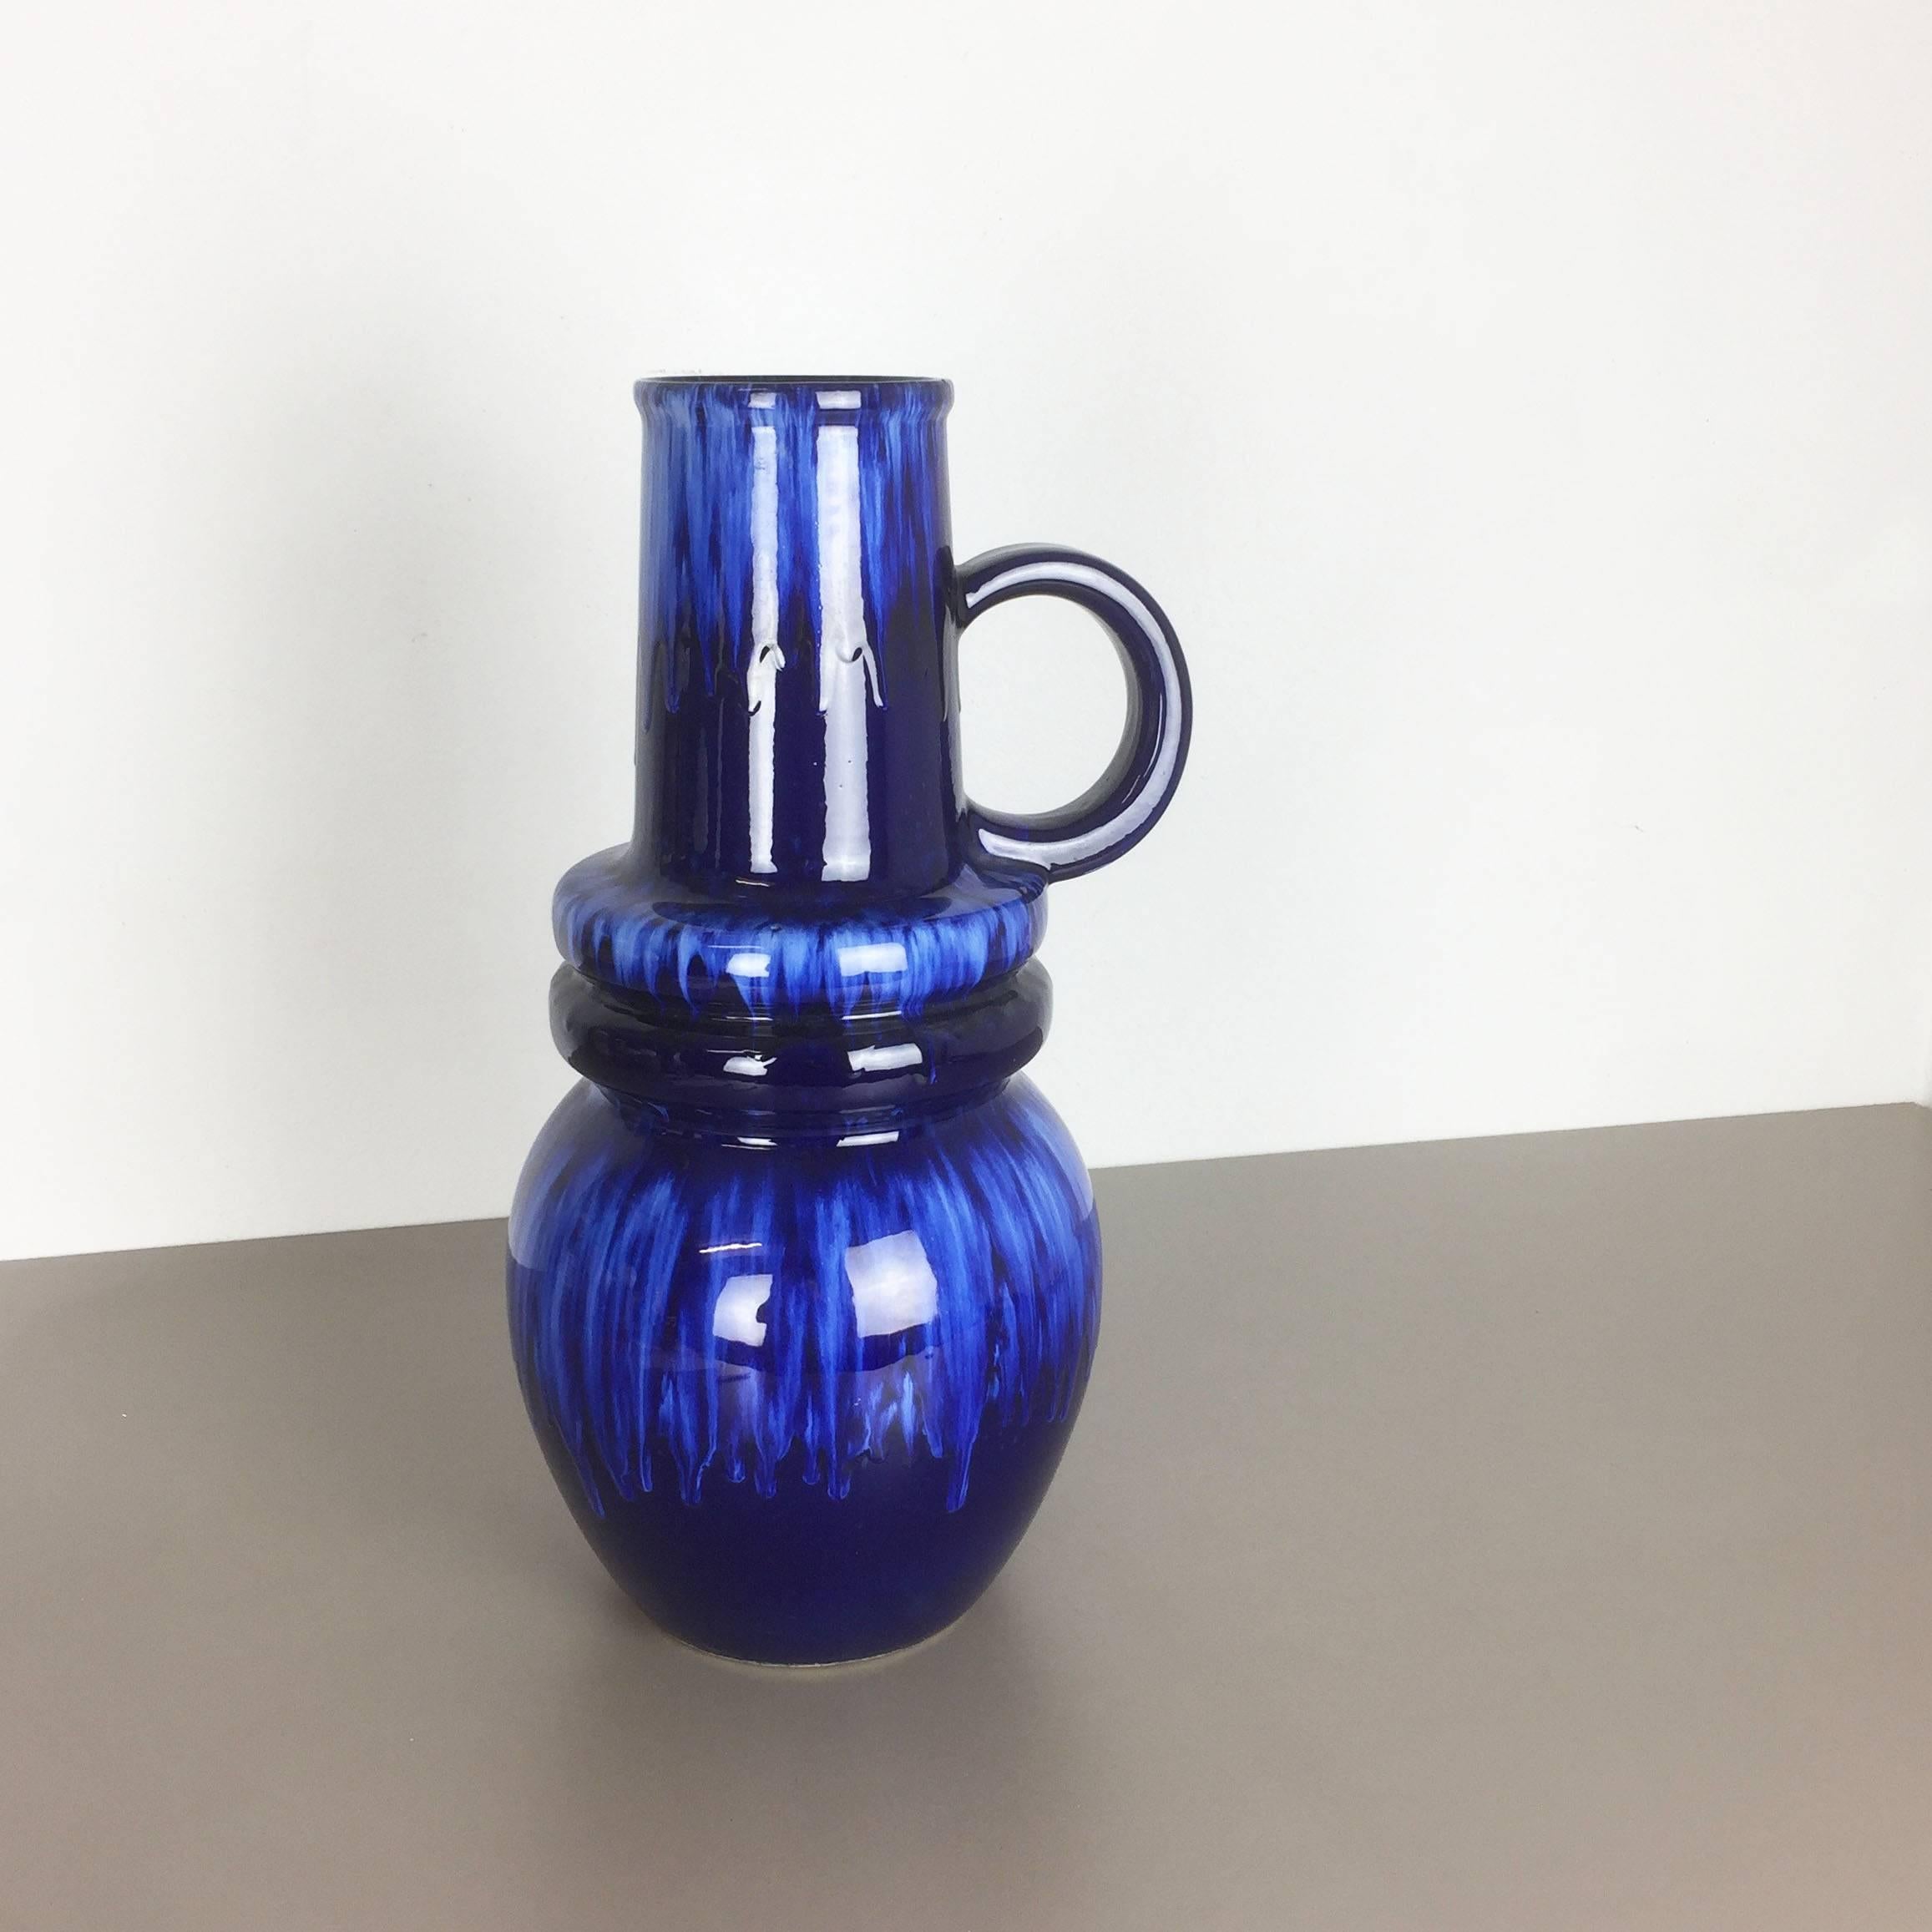 Extra Large Vintage Vienna Fat Lava Vase Made by Scheurich, Germany, 1970s For Sale 4